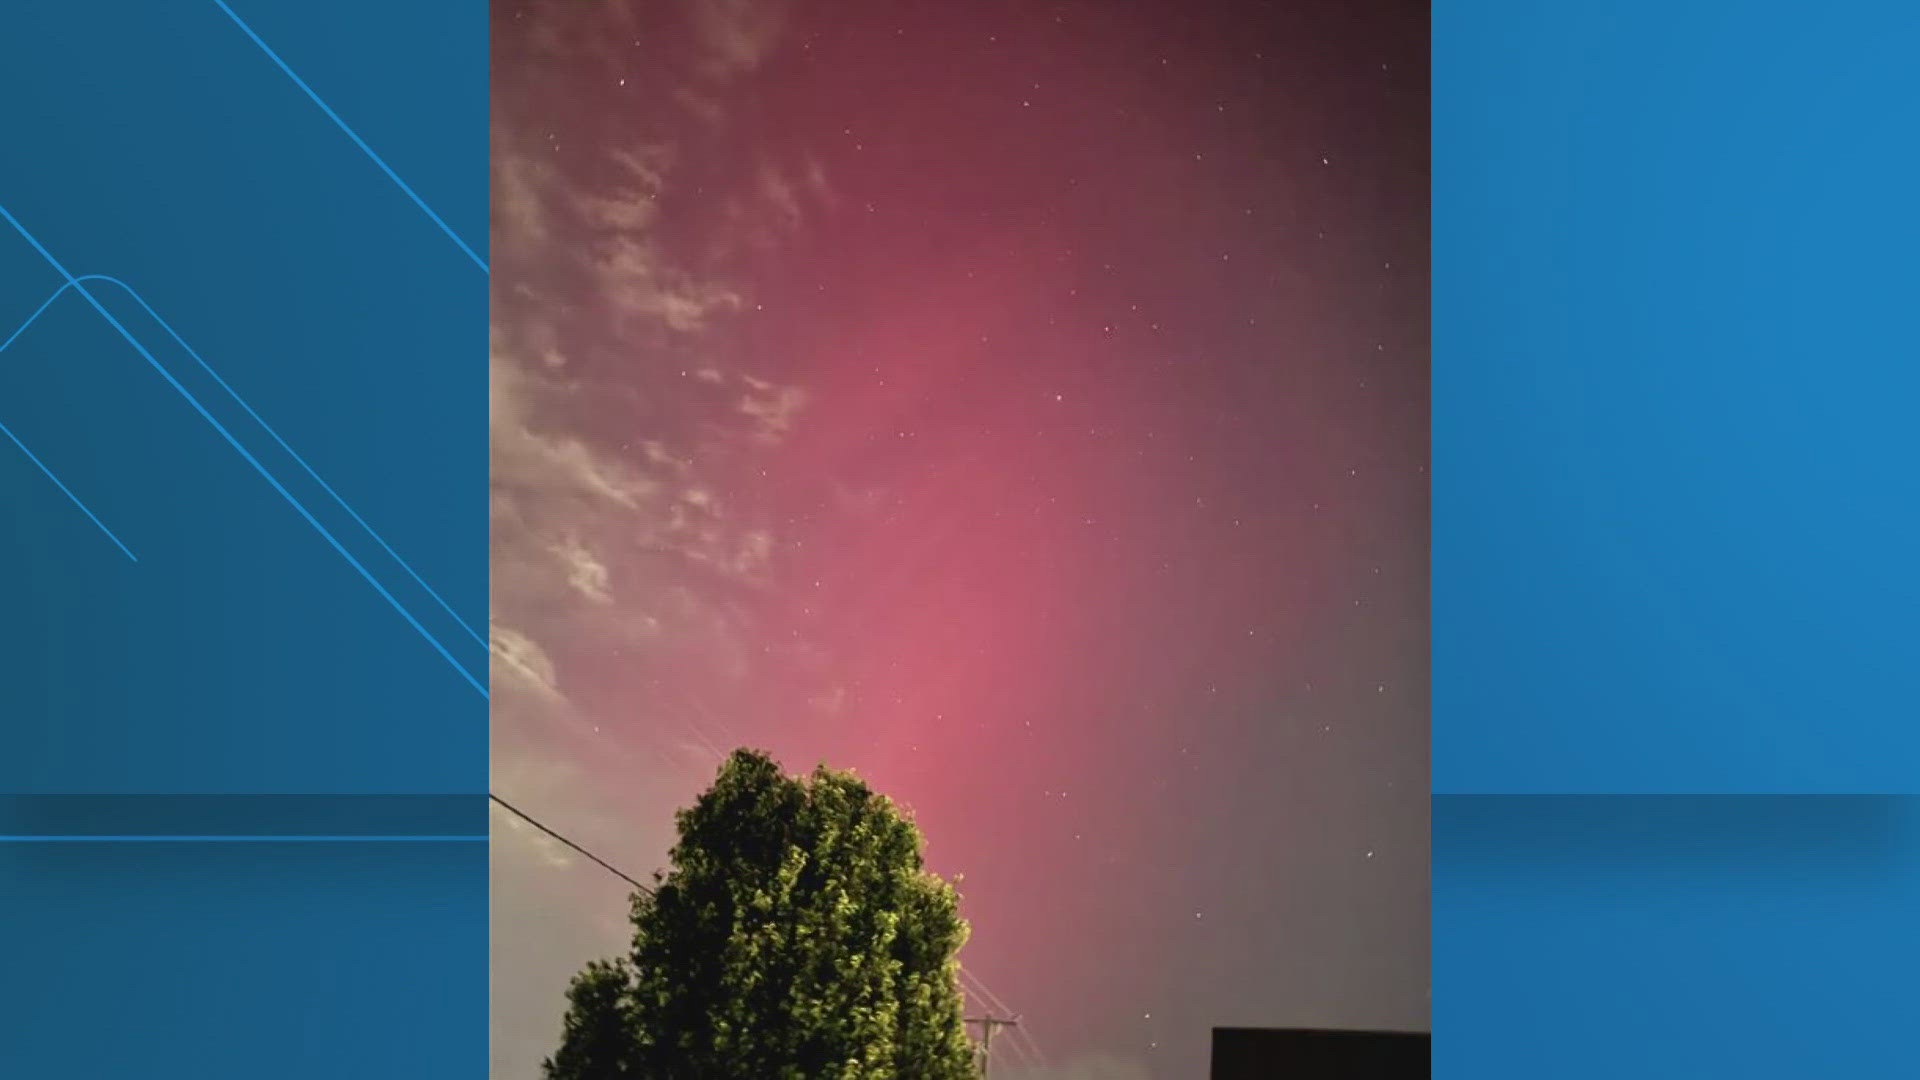 A geomagnetic storm lit up the sky in colorful hues Friday night, including right here in Central Texas!